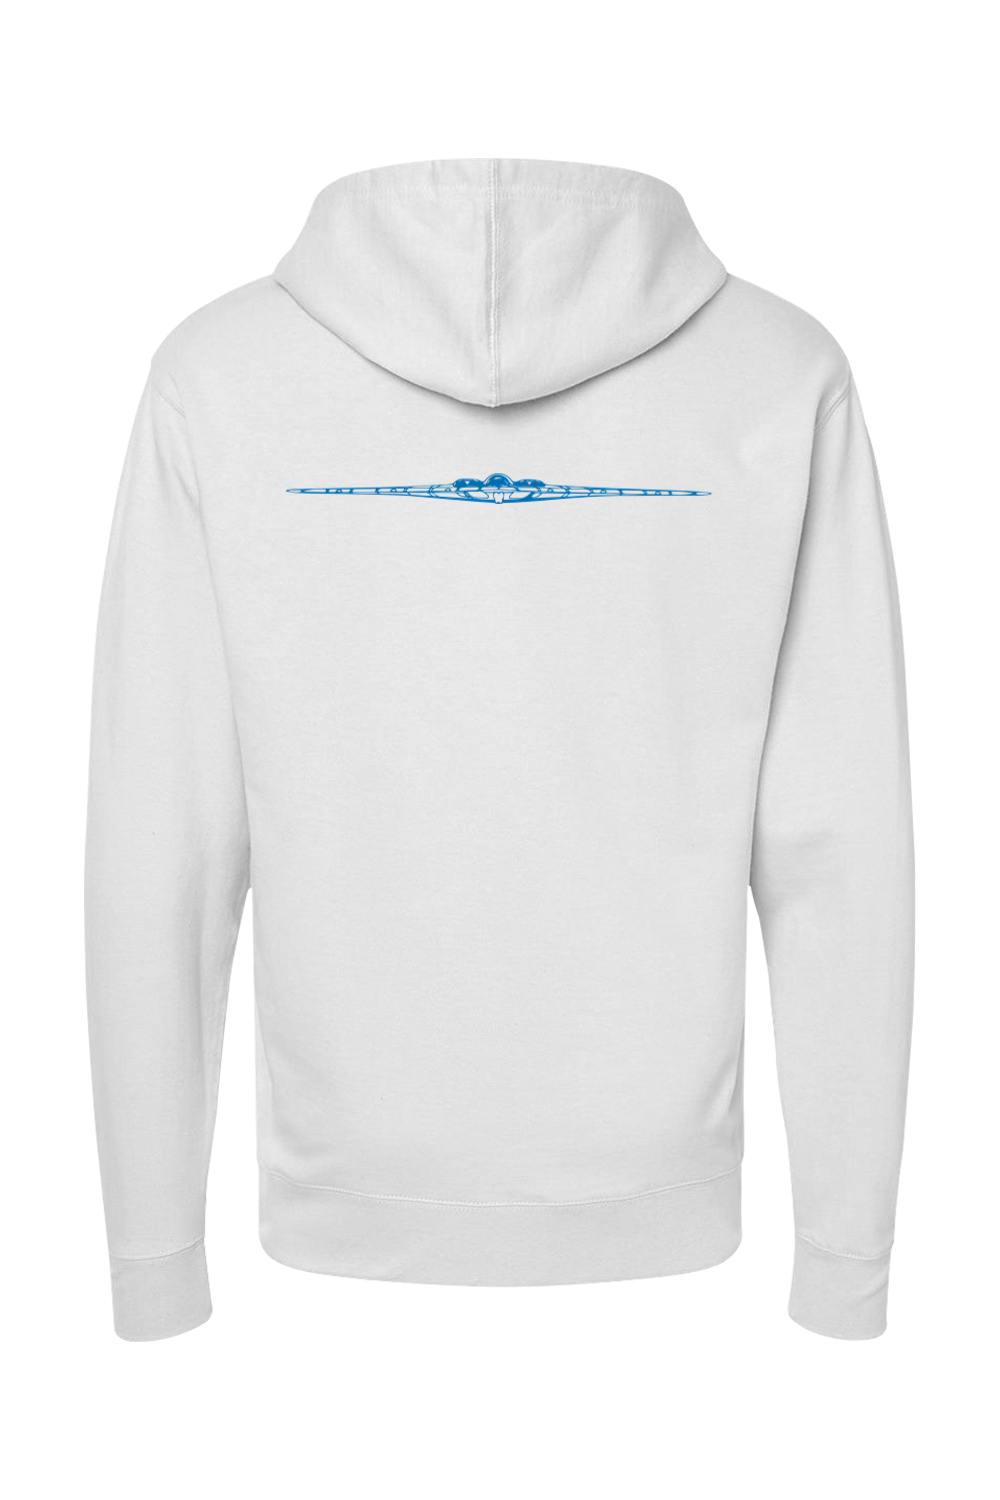 B2 Stealth Bomber - Branch 32 Midweight Hoodie